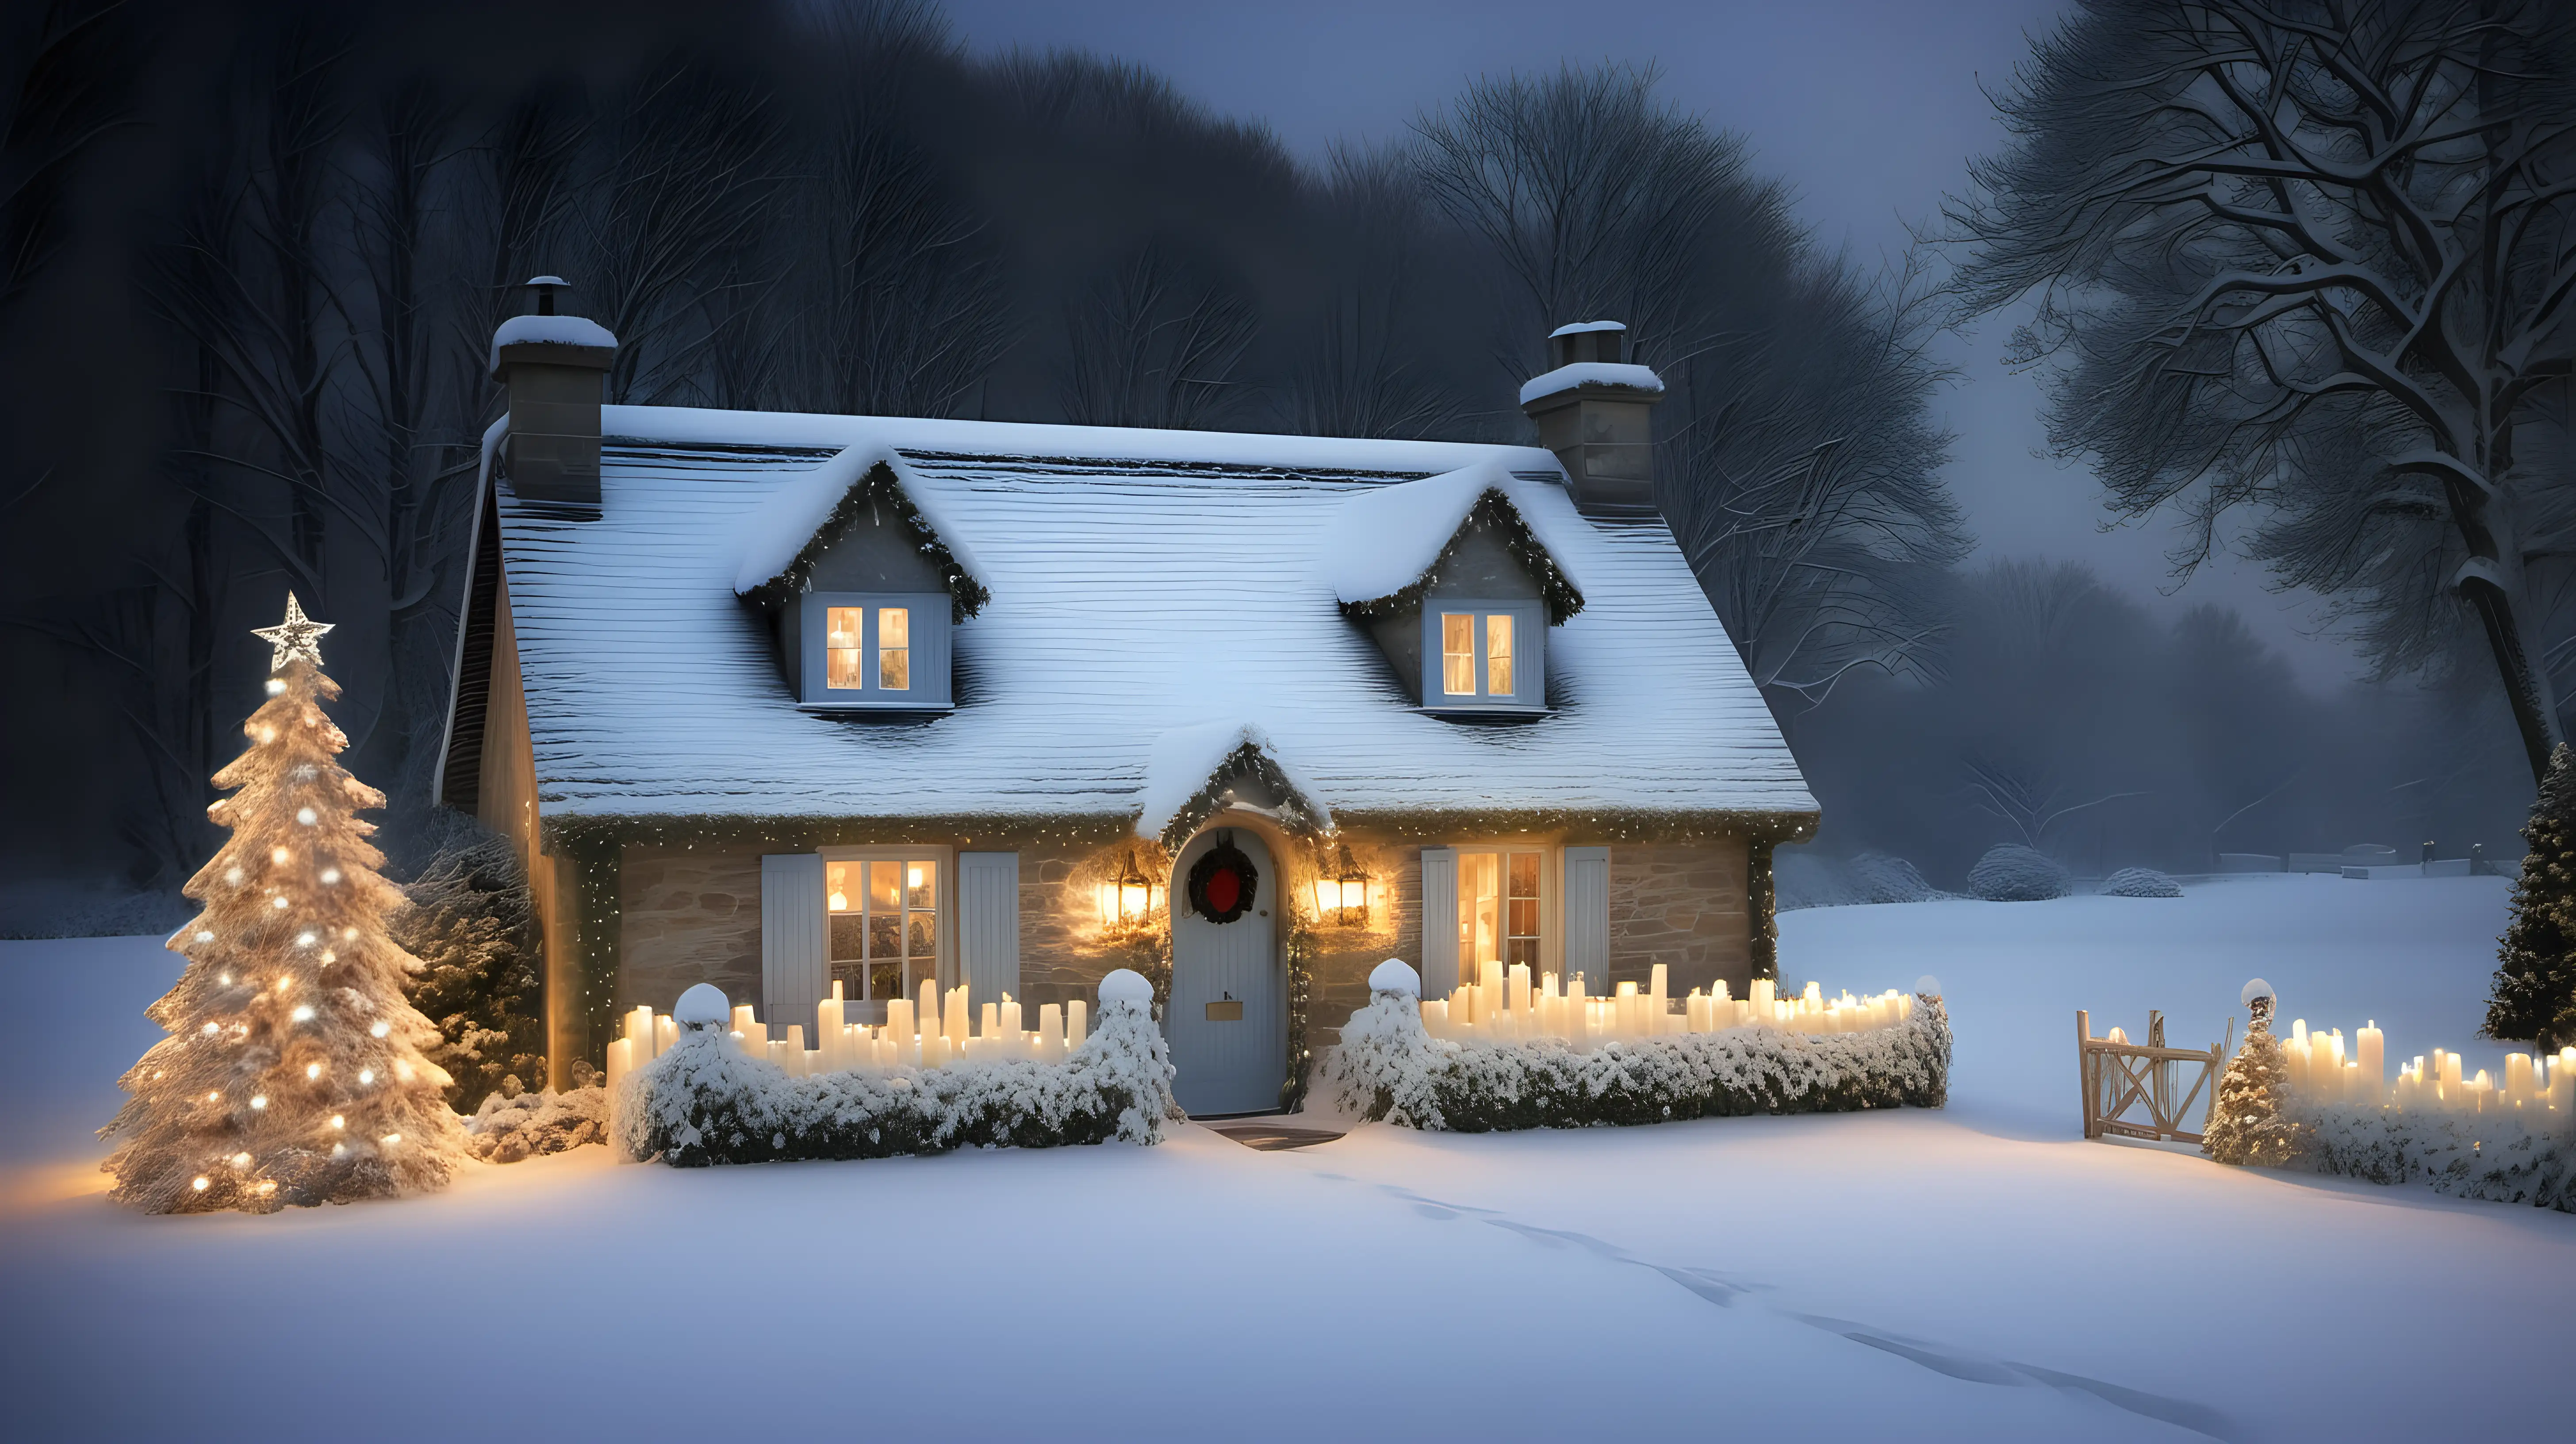 Cozy Countryside Cottage Covered in Snow with Glowing Christmas Candlelight